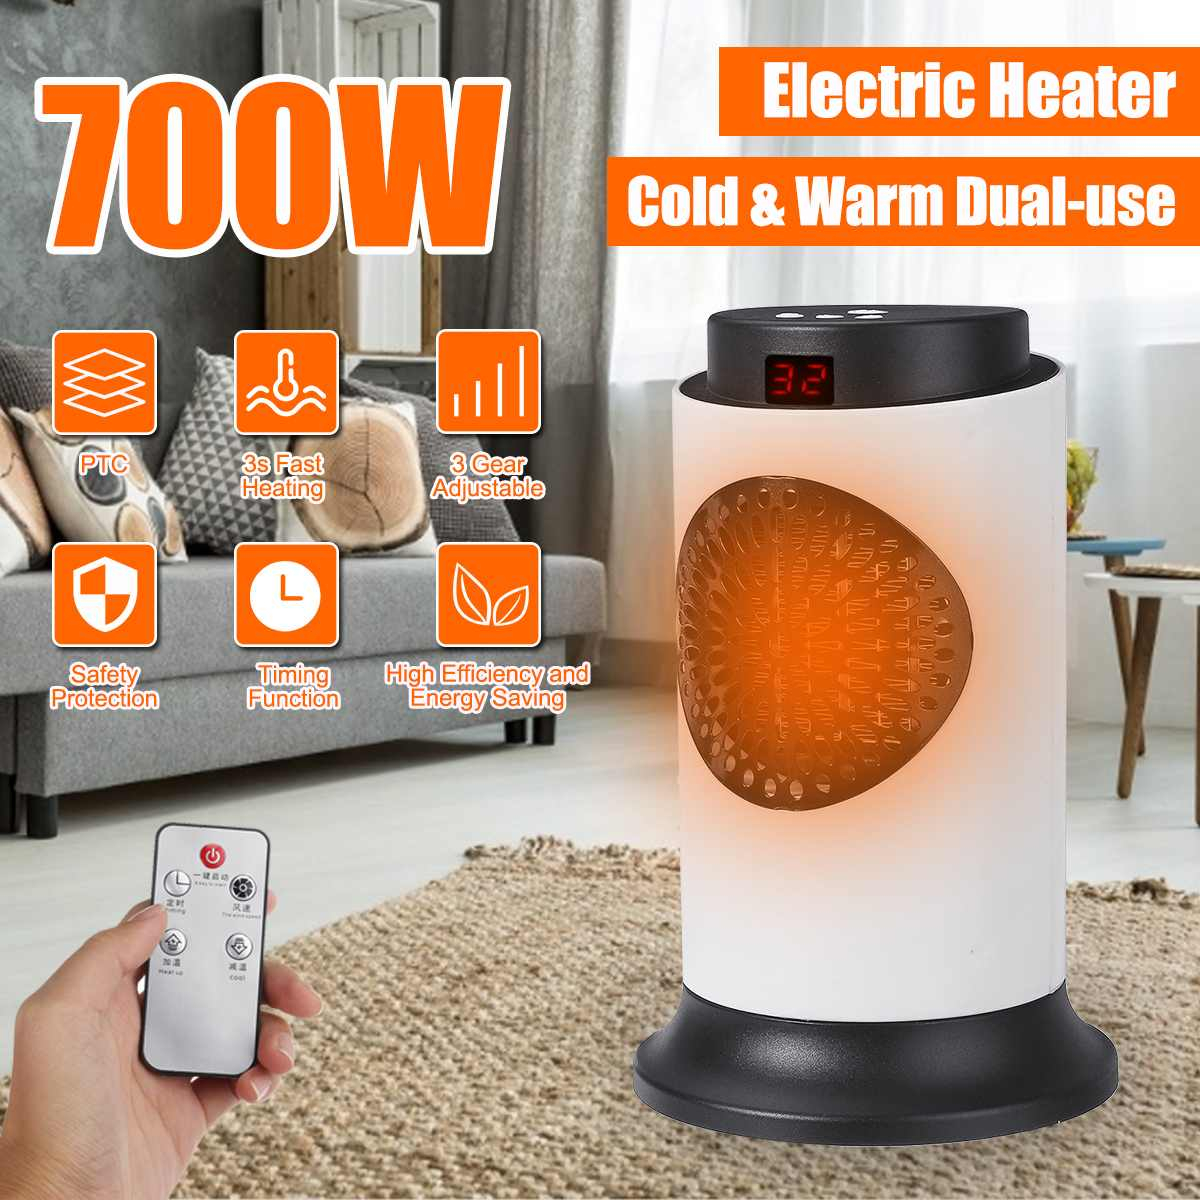 Us 1309 37 Off220v 50hz 700w Power Electric Heater Ceramic Heating Electric Warmer Heater Room Heaters Warm Air Fan Heaterelectric Heaters pertaining to size 1200 X 1200